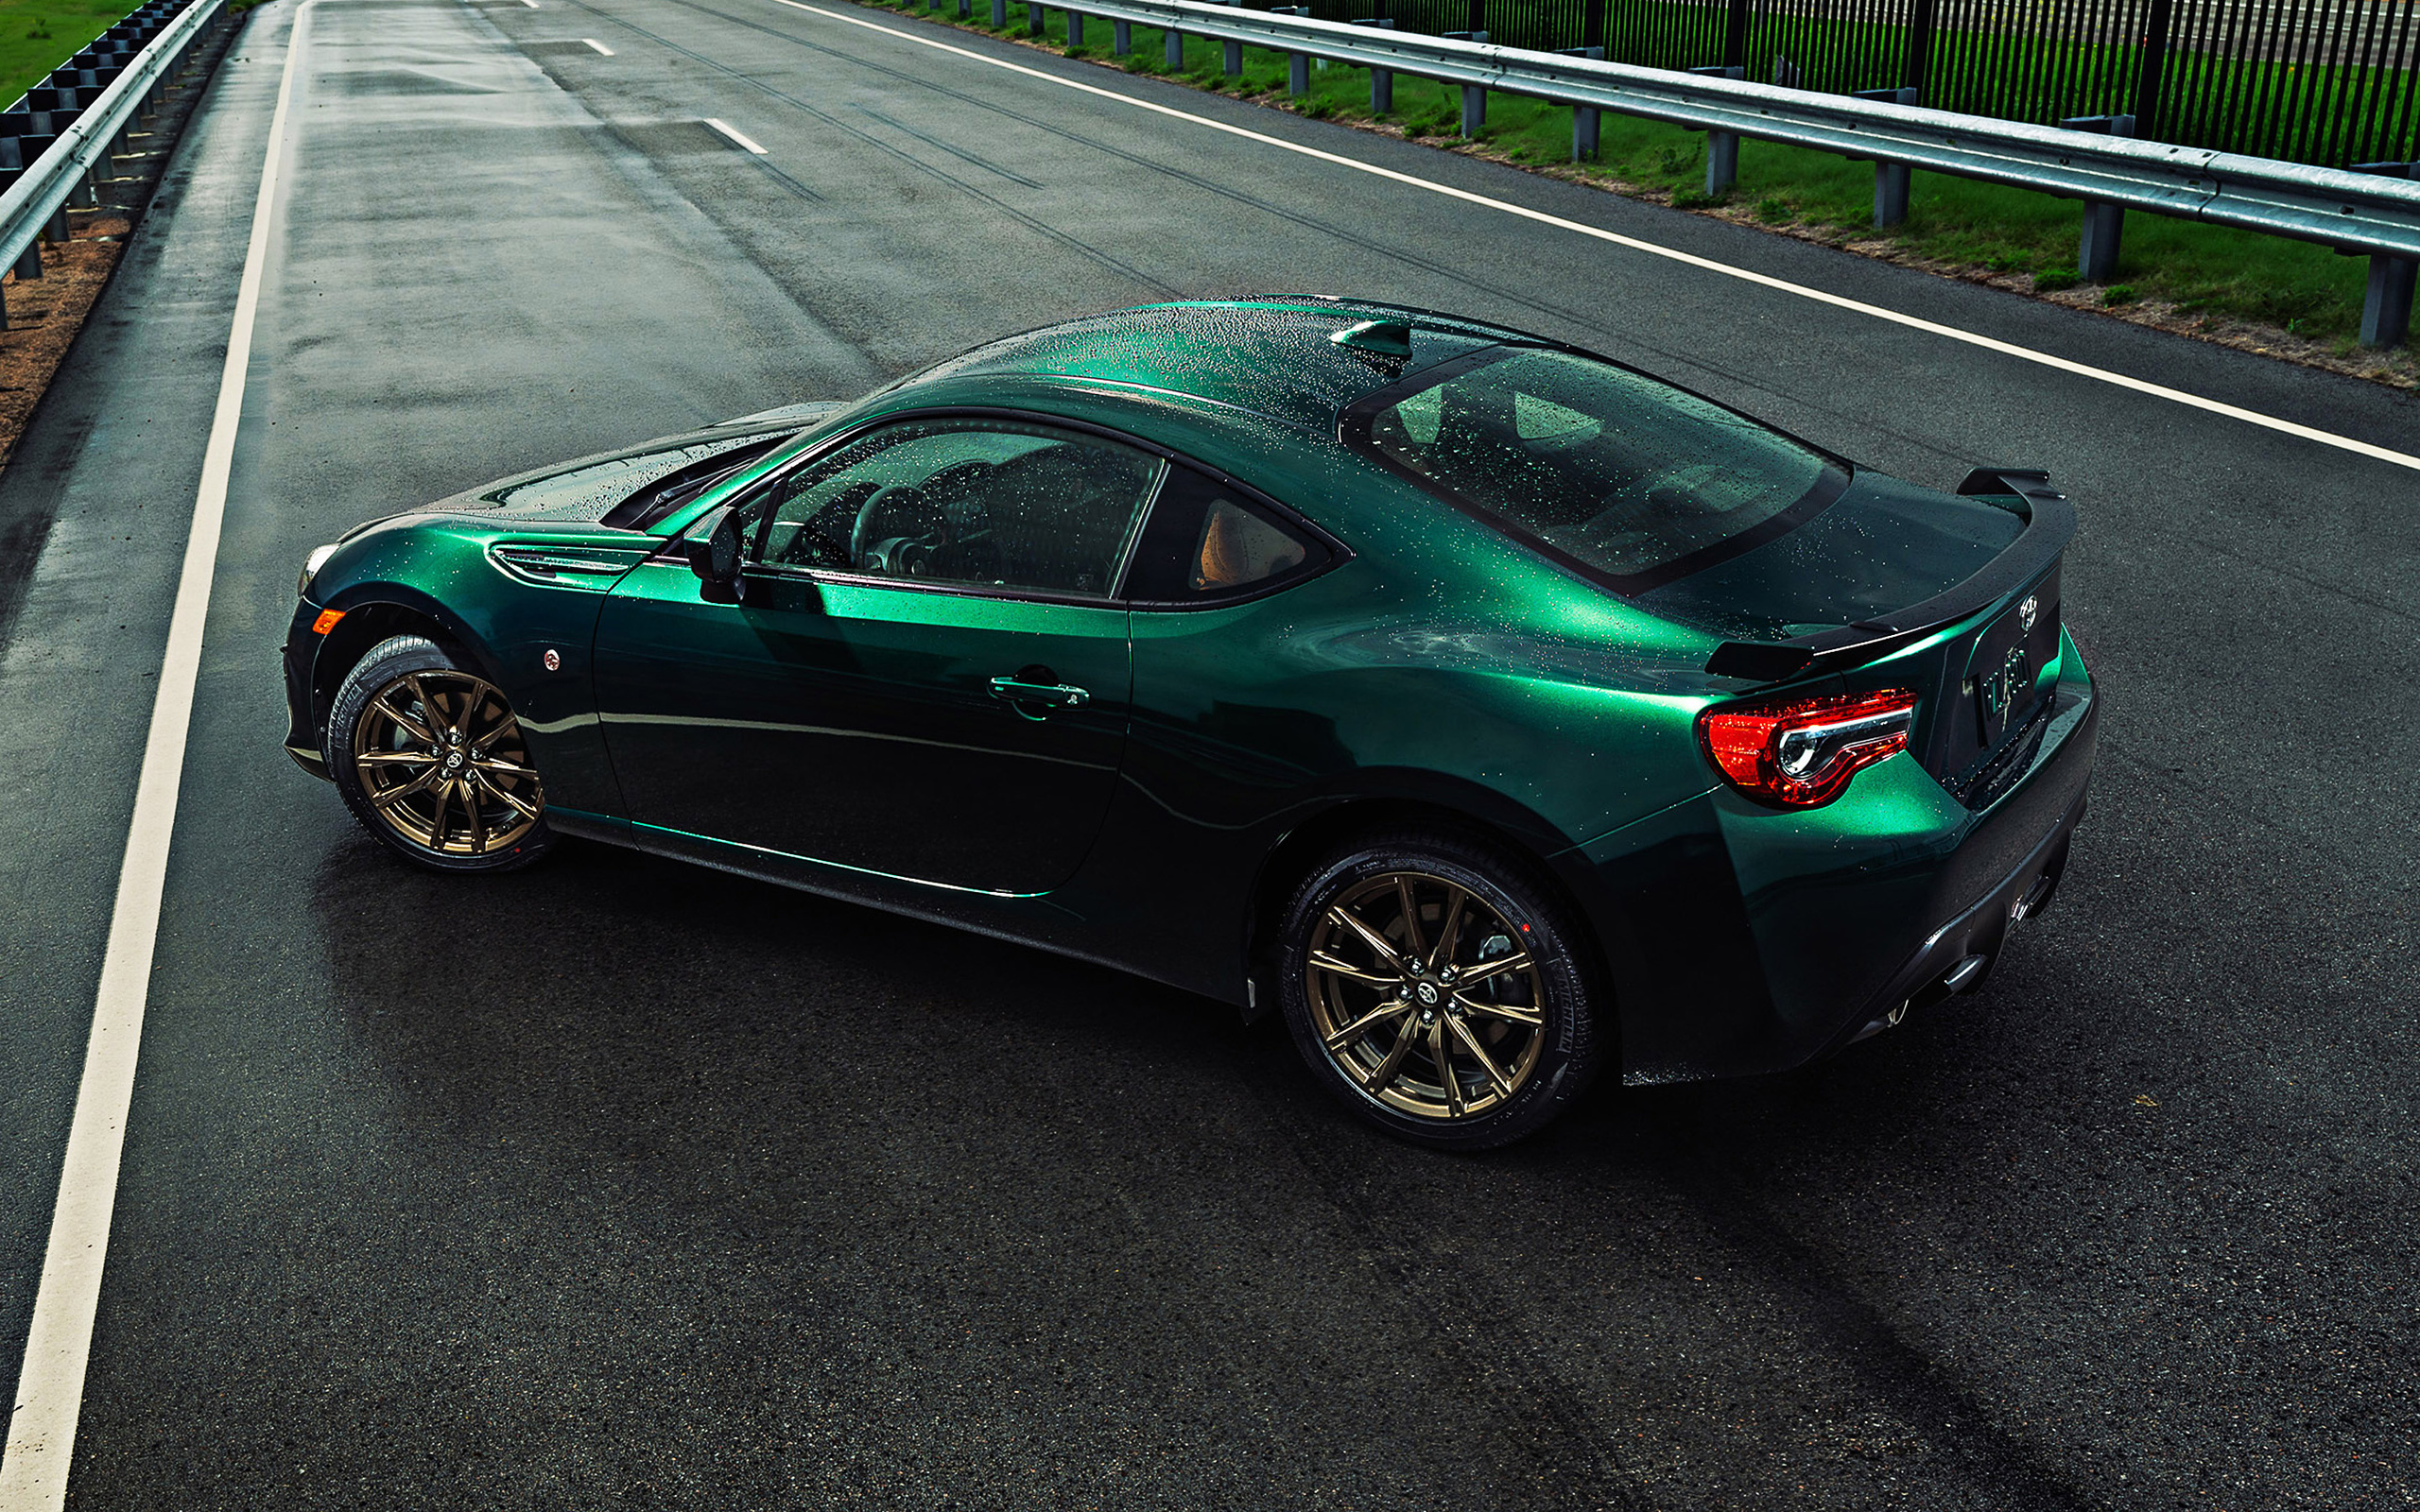 2020, toyota, 86, hakone, edition, rear view, exterior, green, sports coupe, gt86